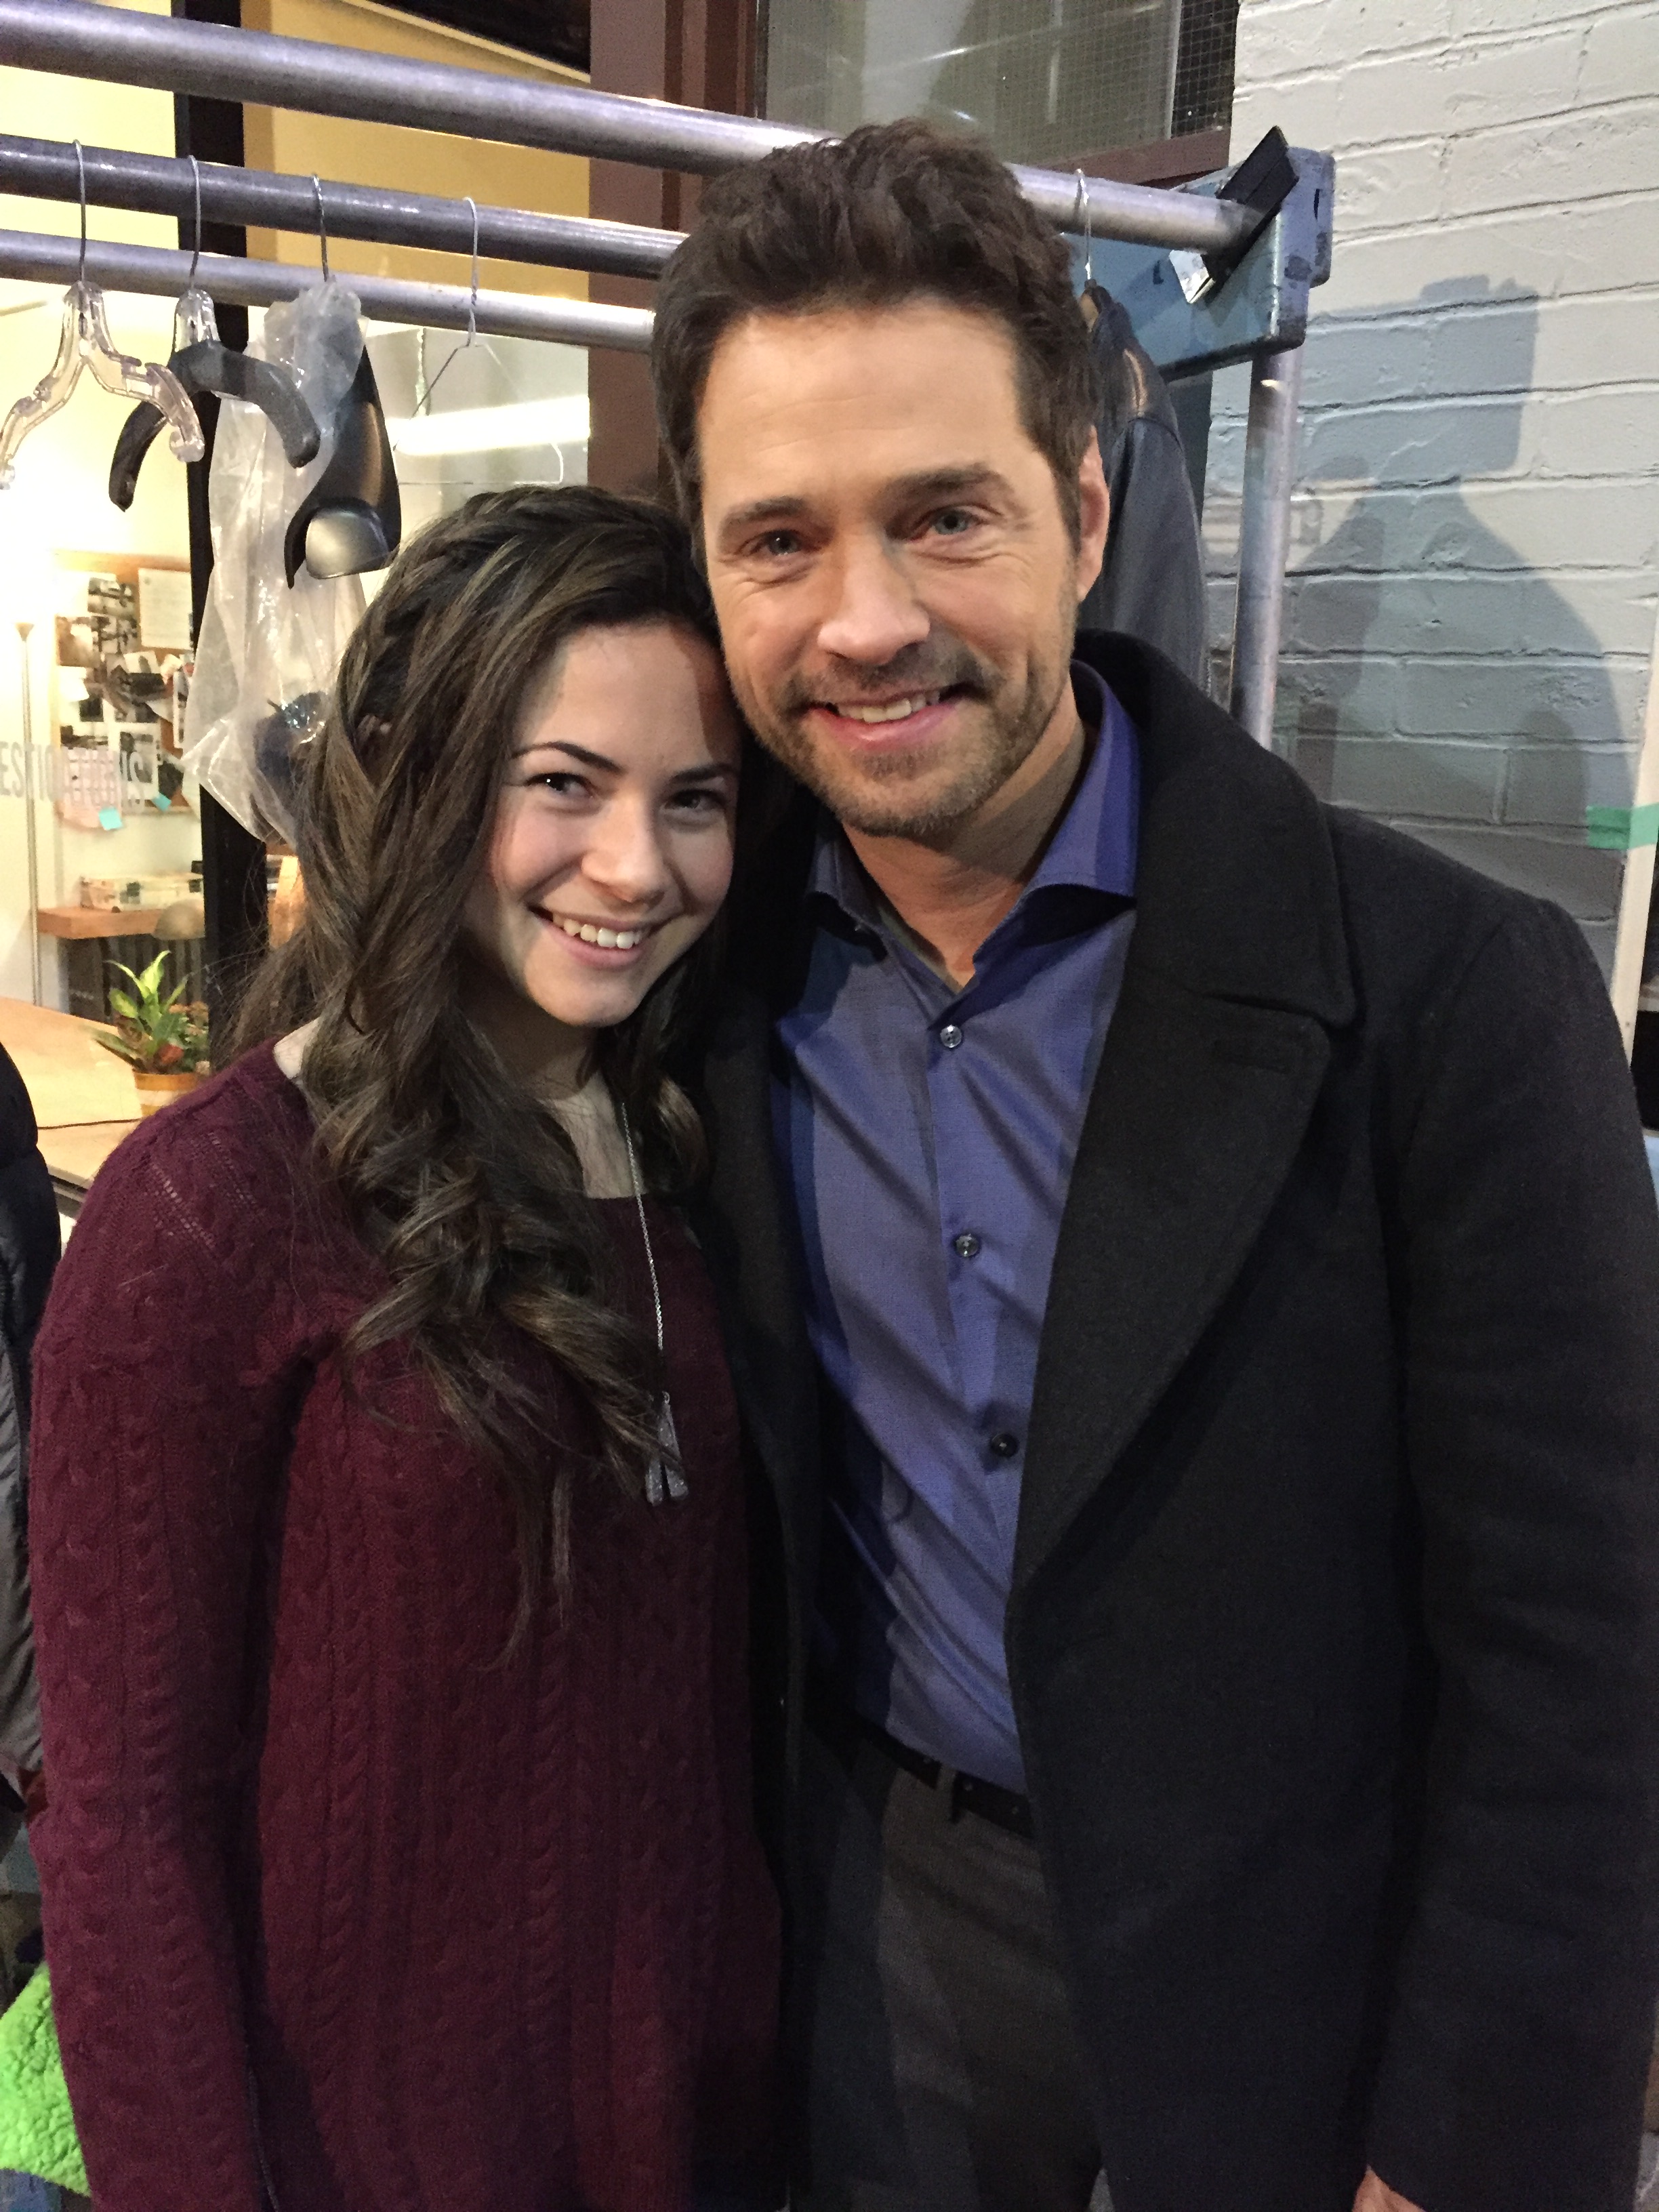 Jordyn with Jason Priestley on the set of Private Eyes (Dec 2015)